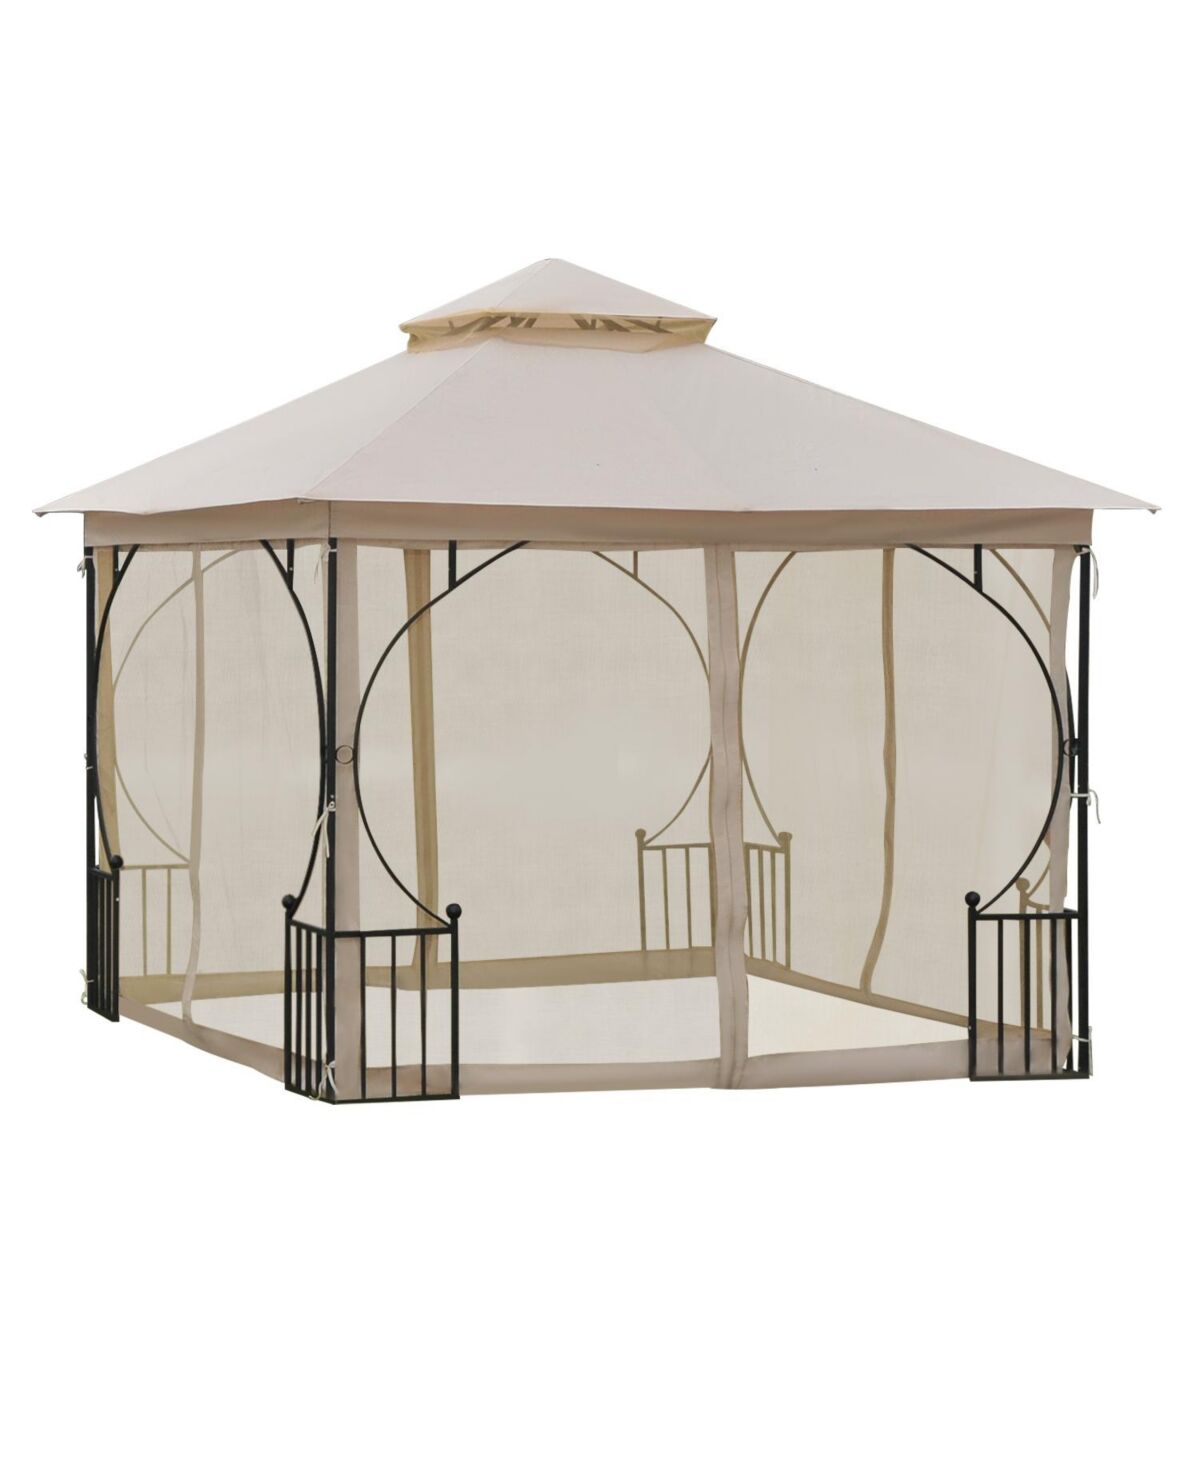 Outsunny 10' x 10' Patio Gazebo, Outdoor Canopy Pavilion with Mesh Netting Sidewalls, 2-Tier Polyester Roof, & Steel Frame, Beige - Beige/khaki